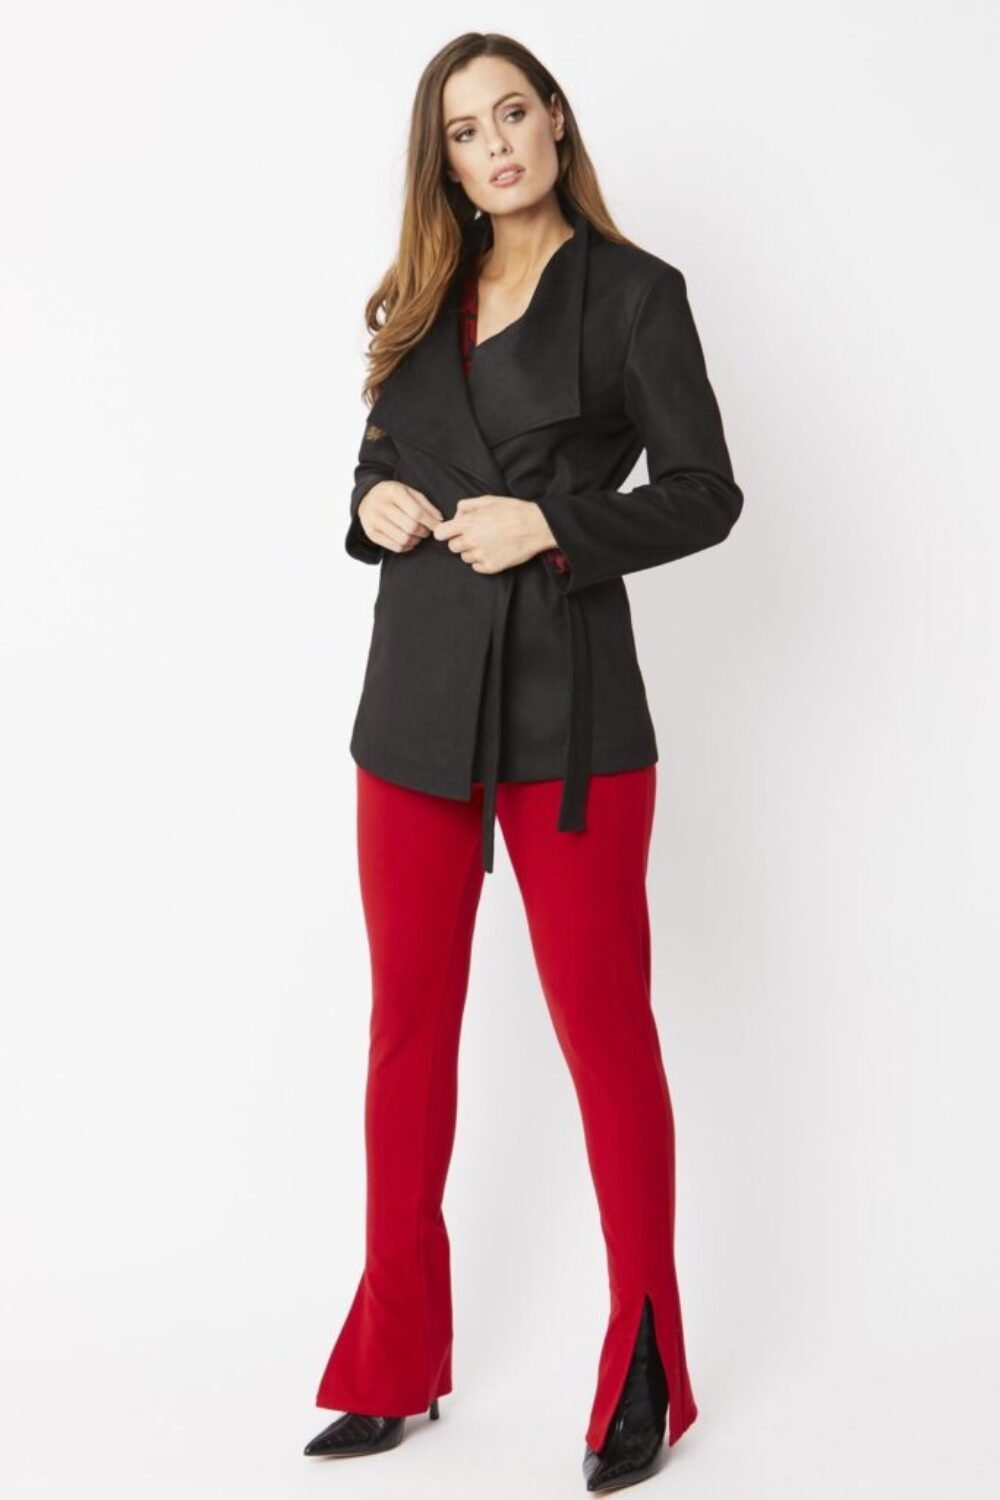 Shop Lux Black Faux Suede Jacket Tie Waist and women's luxury and designer clothes at www.lux-apparel.co.uk